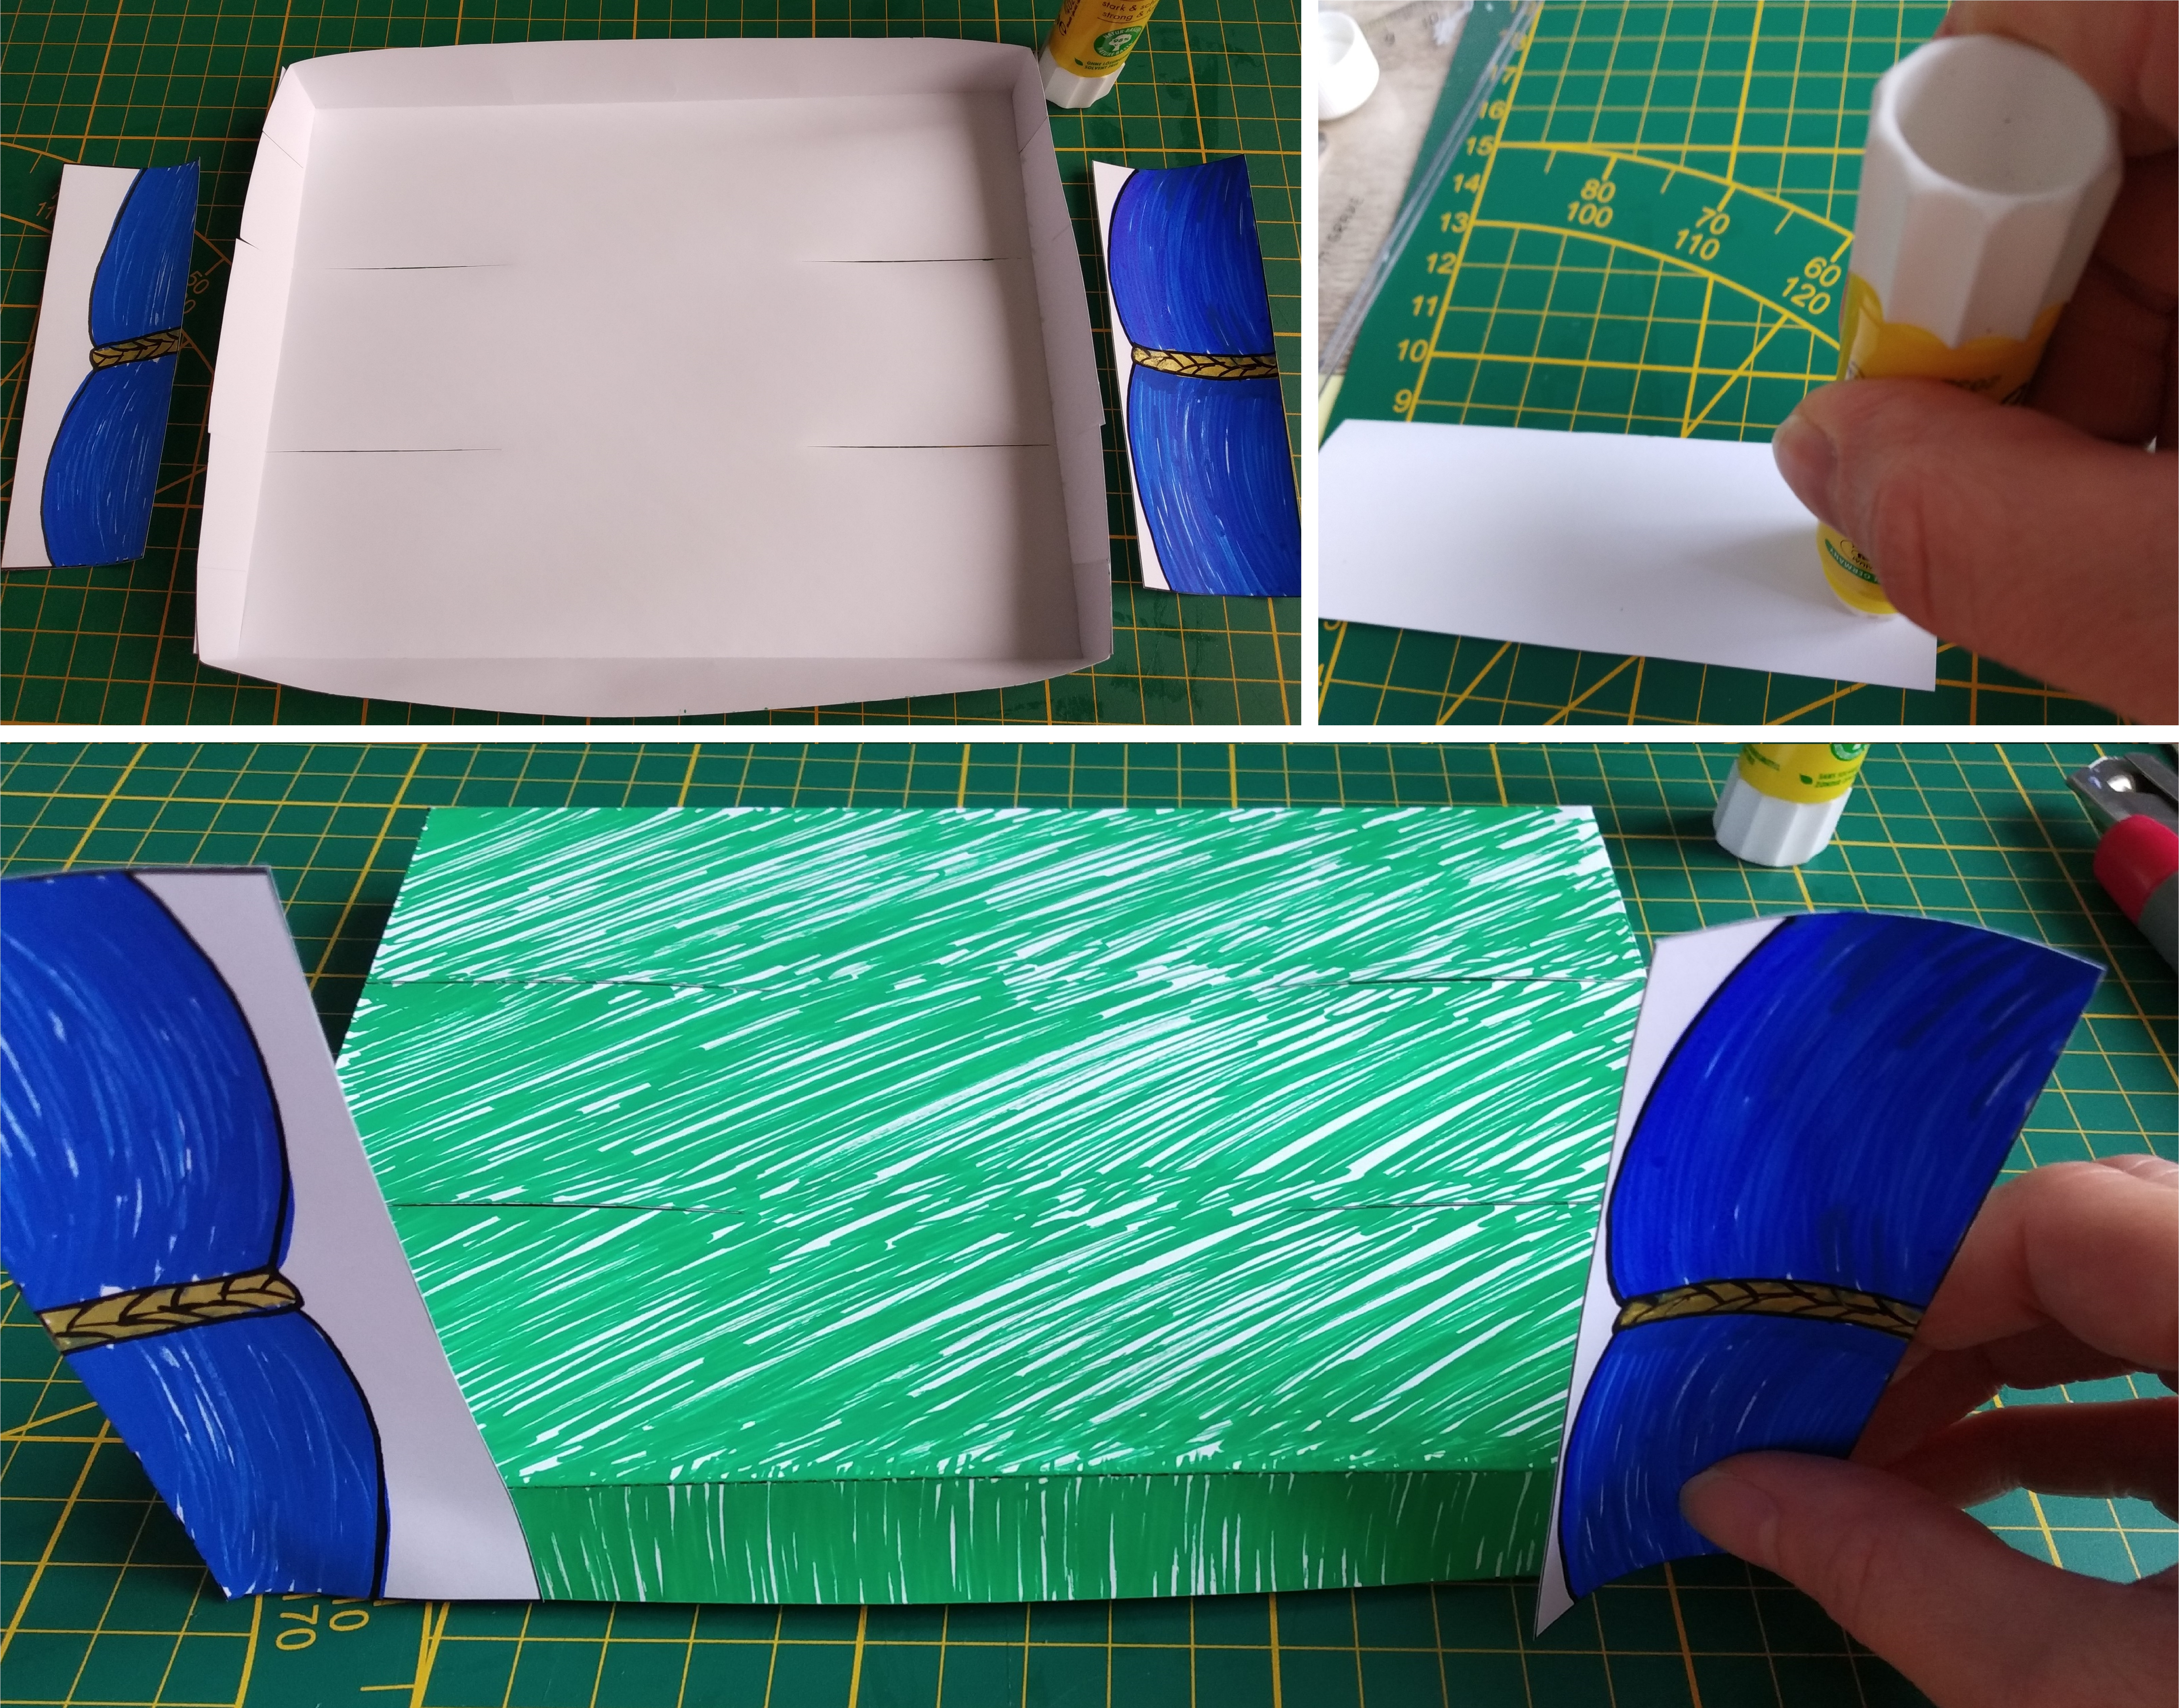 three images of a paper theater base which has been painted green; a gluestick is used to attach the paper "curtains" to the front corners of the stage